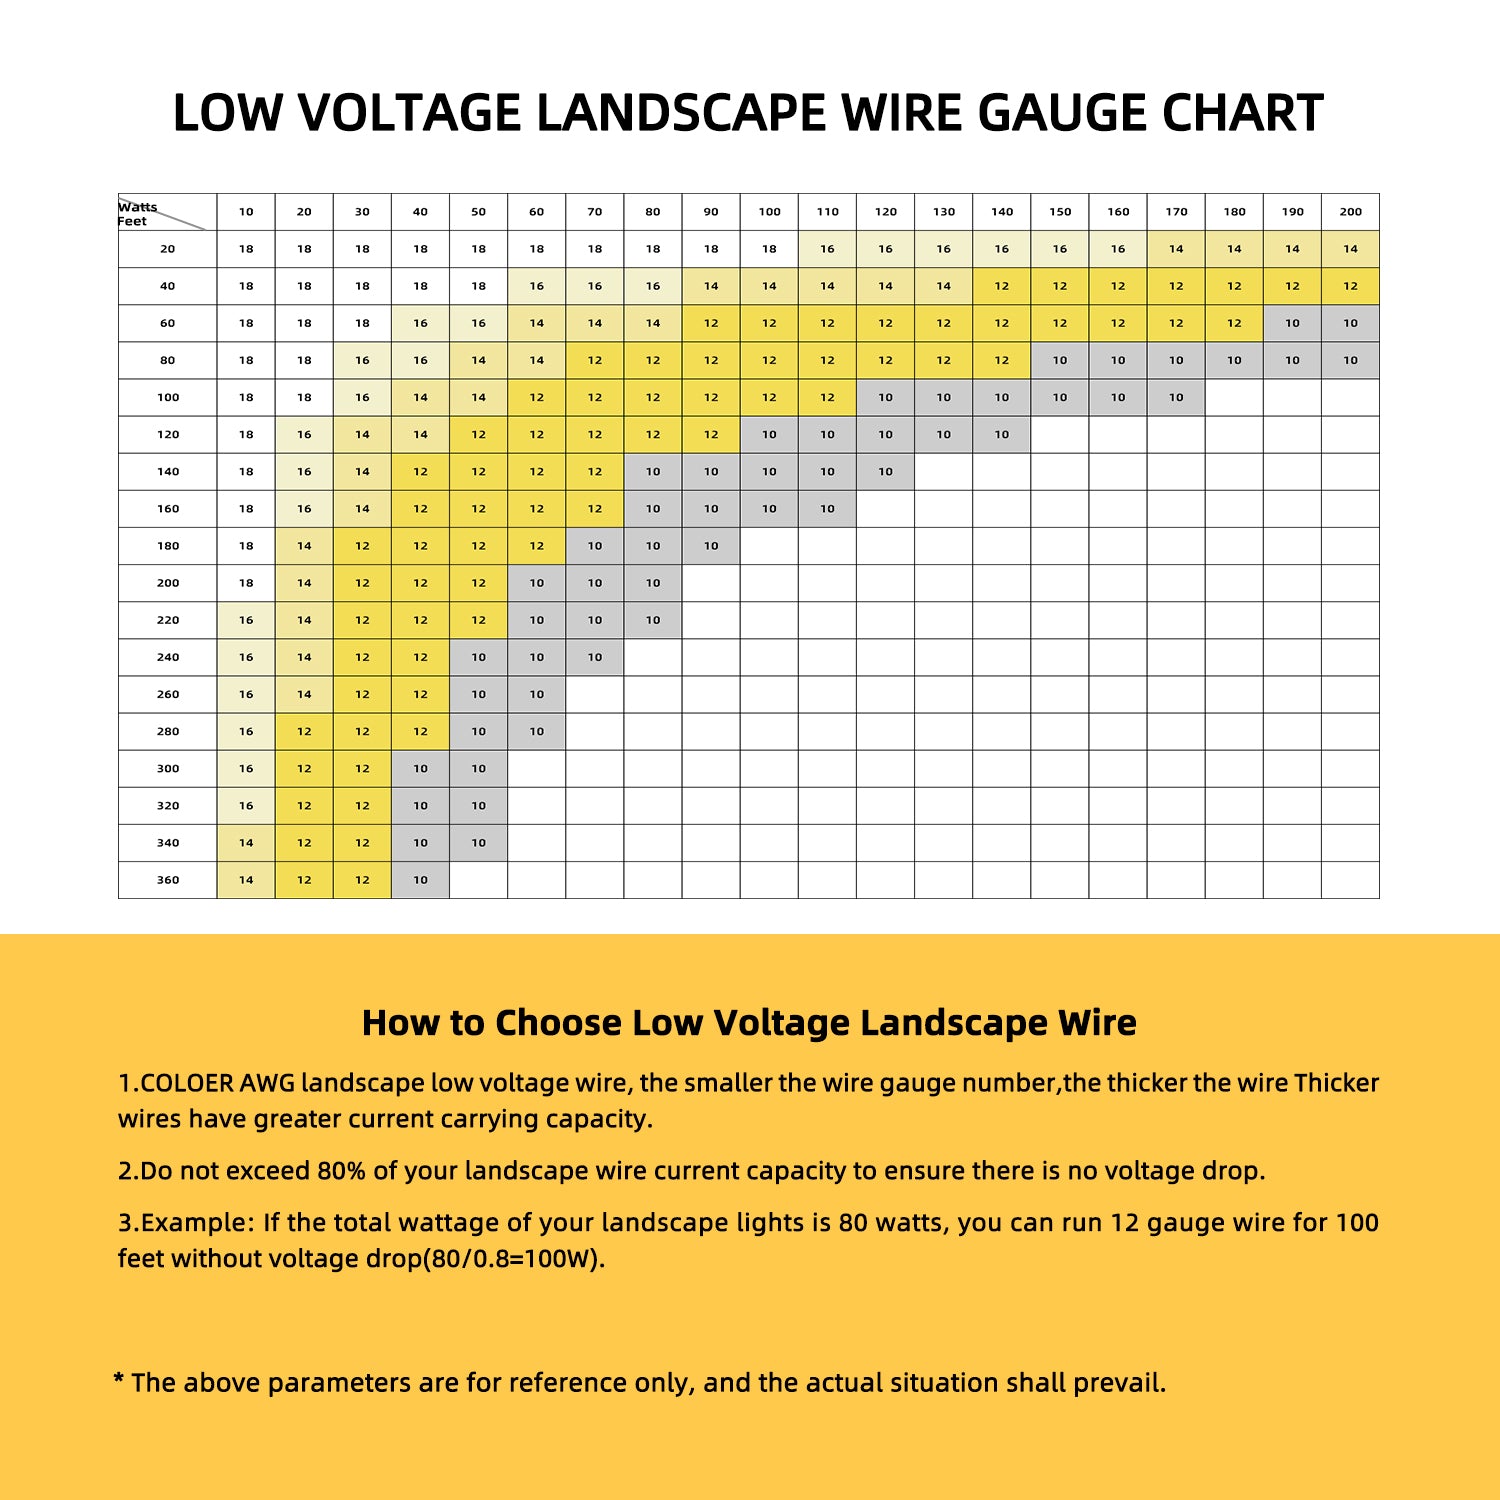 Chart for low voltage landscape wire gauge showing wire gauge numbers and maximum lengths for different wattages, with instructions on selecting appropriate wire thickness to avoid voltage drop. Example provided.